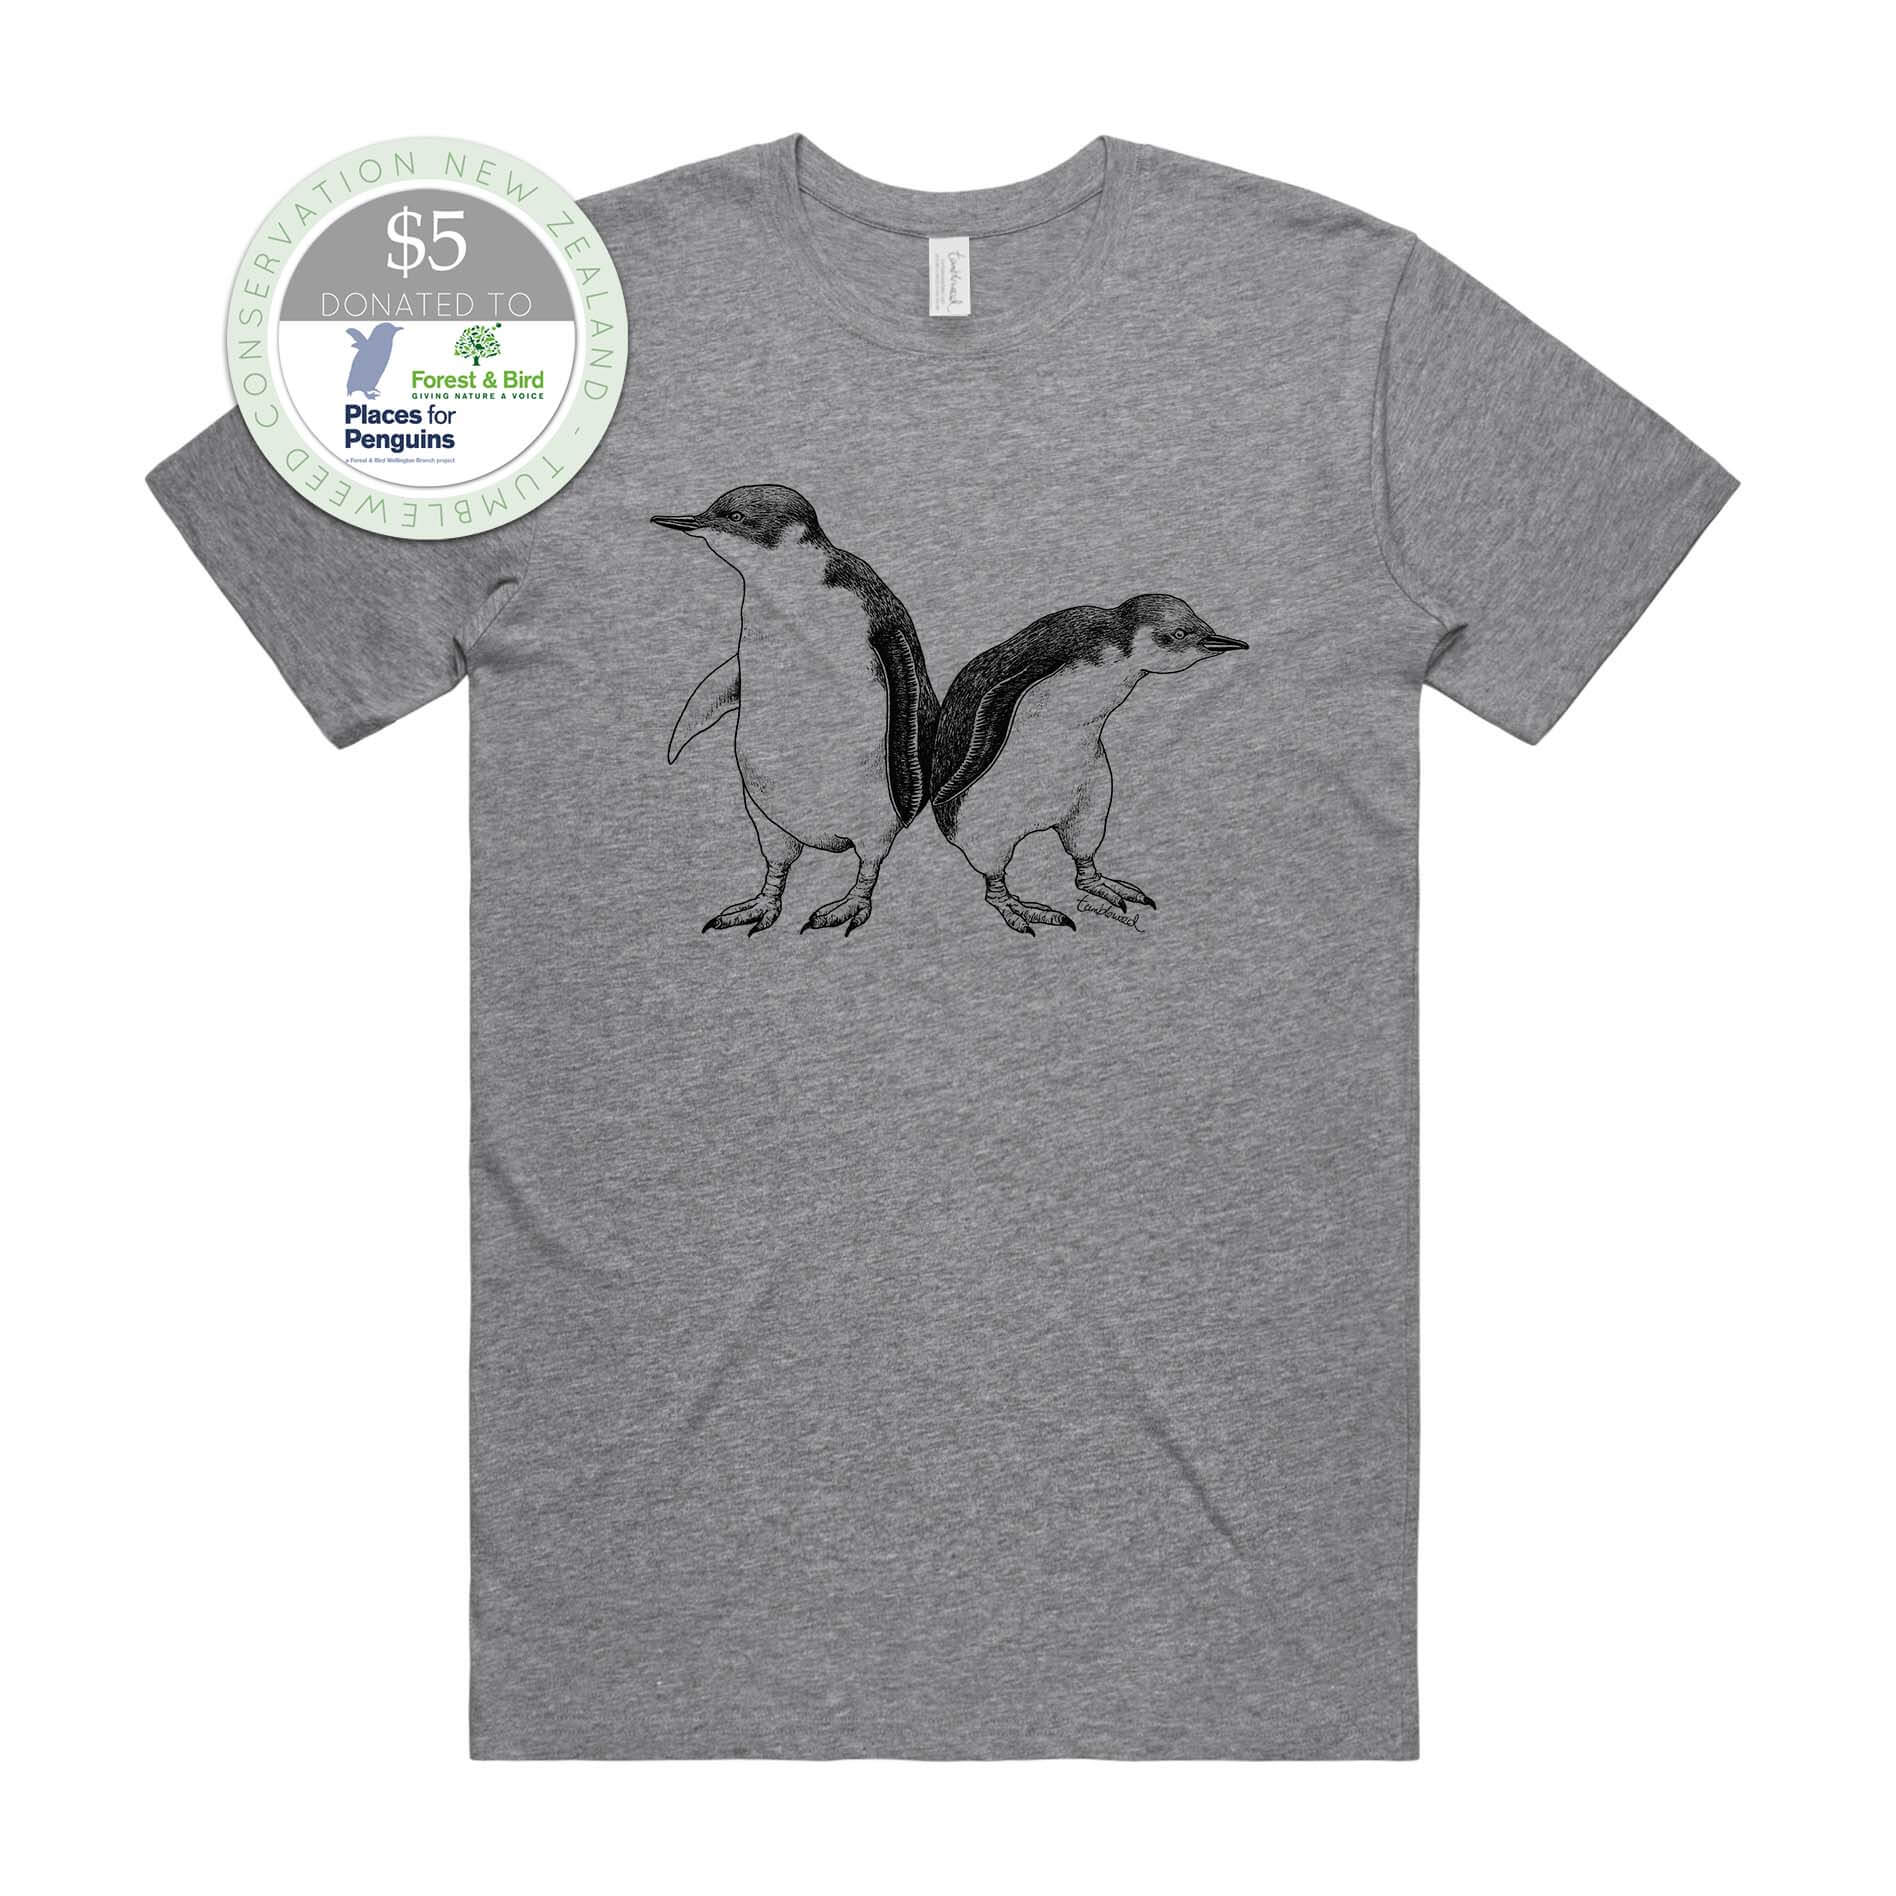 Grey marle, female t-shirt featuring a screen printed Little Blue Penguin design.